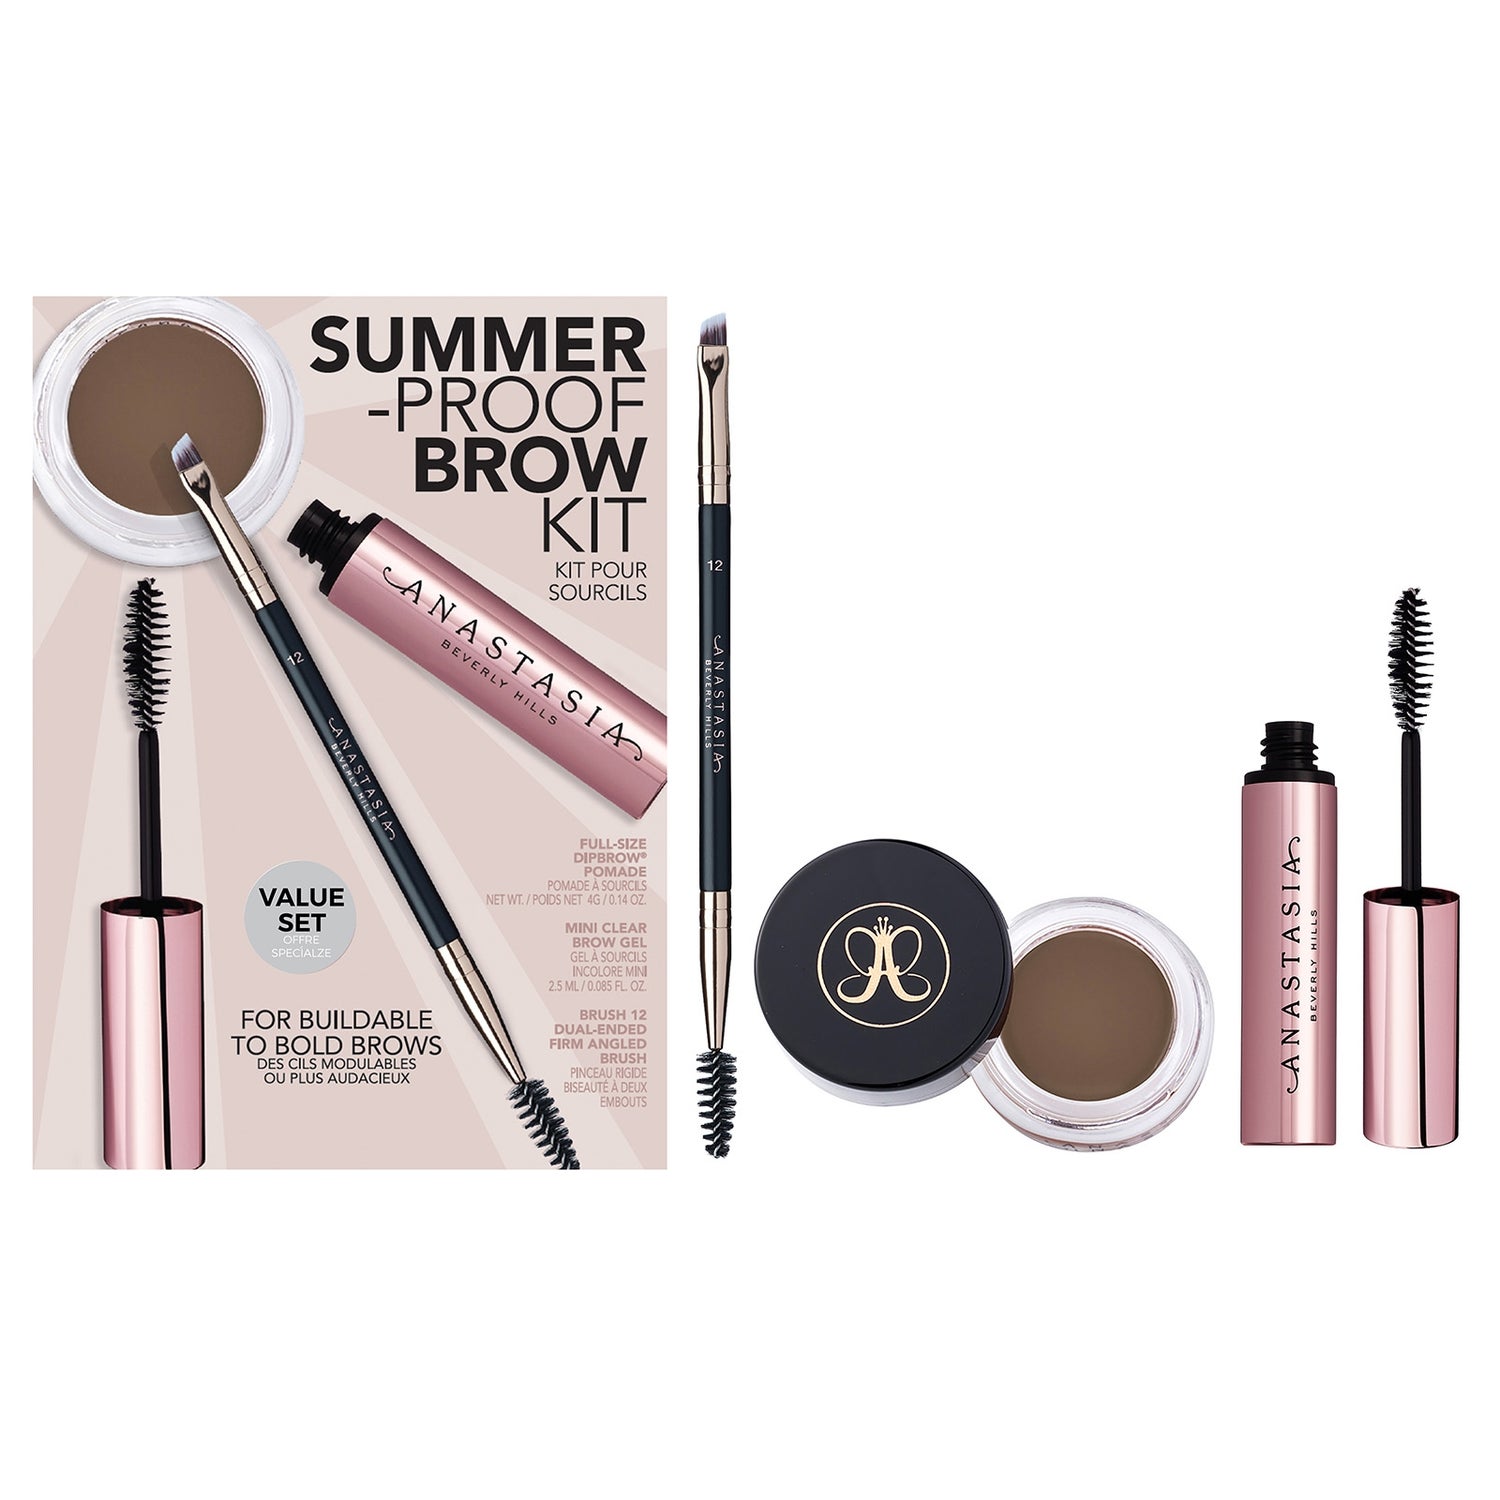 Summer-Proof Brow Kit (£49 Value)